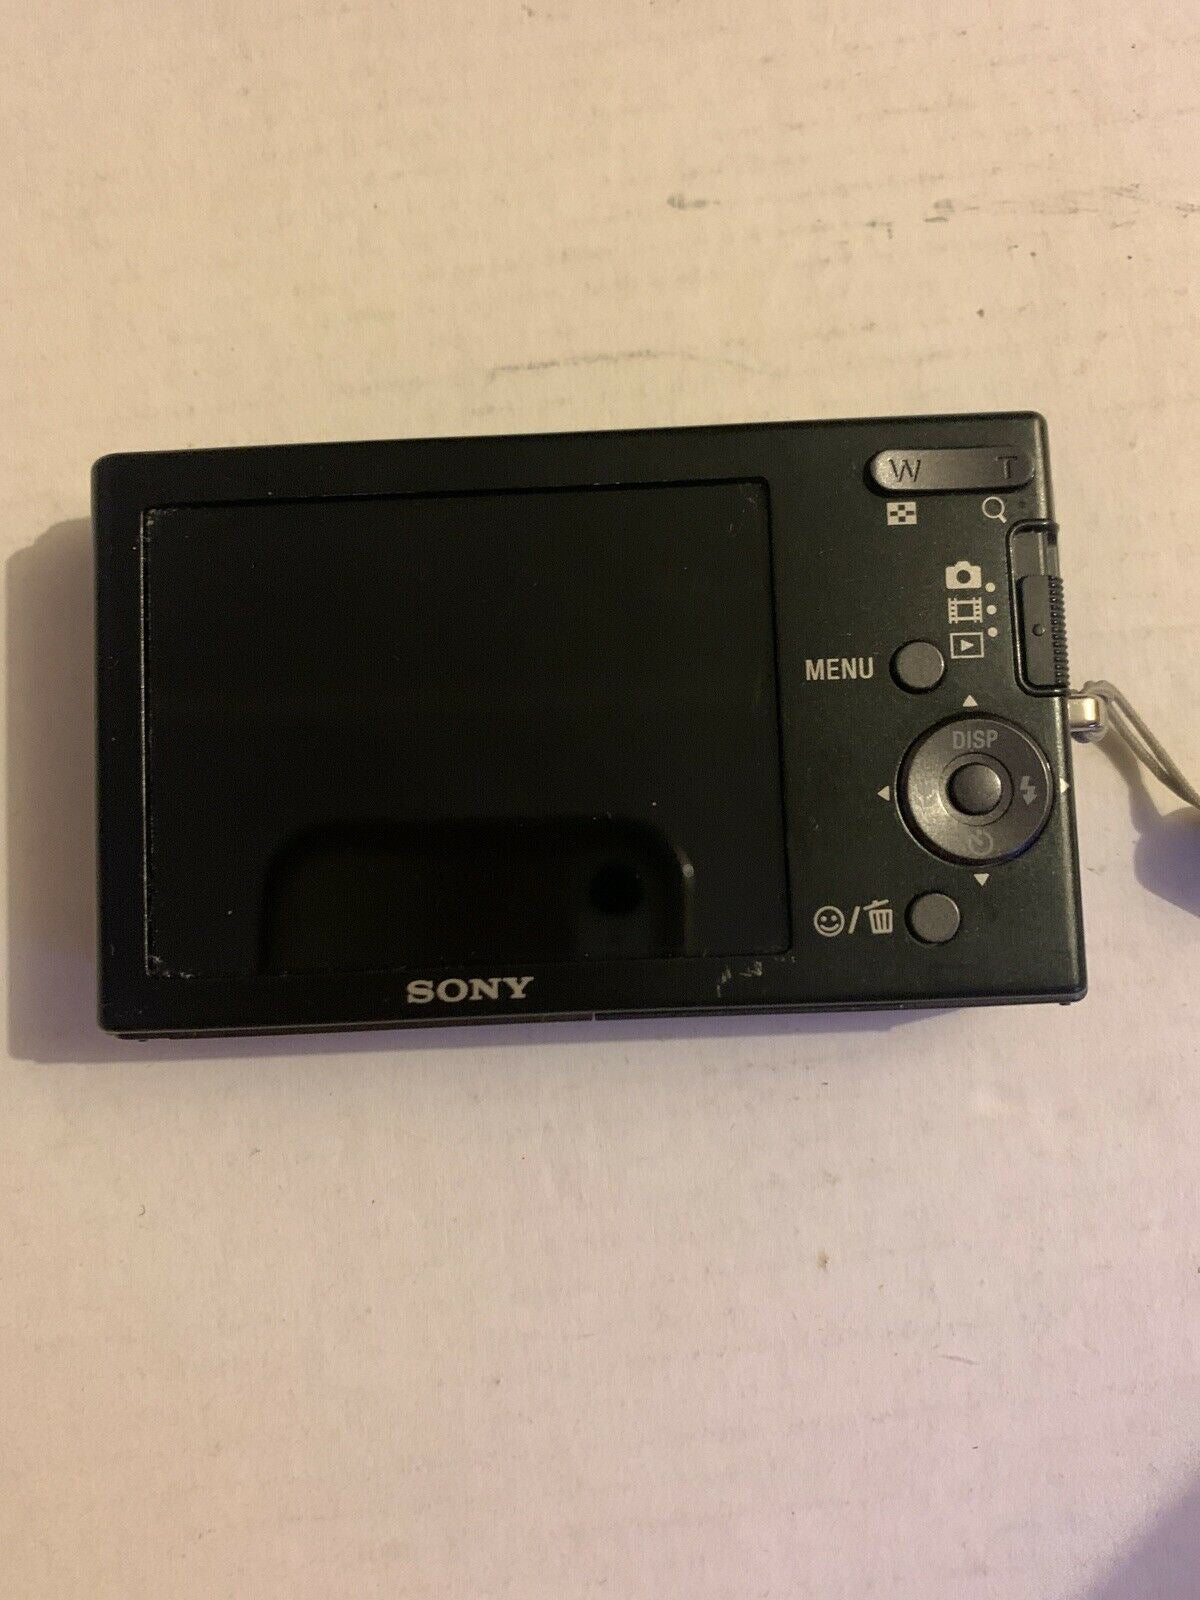 Sony Cyber-Shot DSC-W180 Digital Camera 10.1 MP With Charger